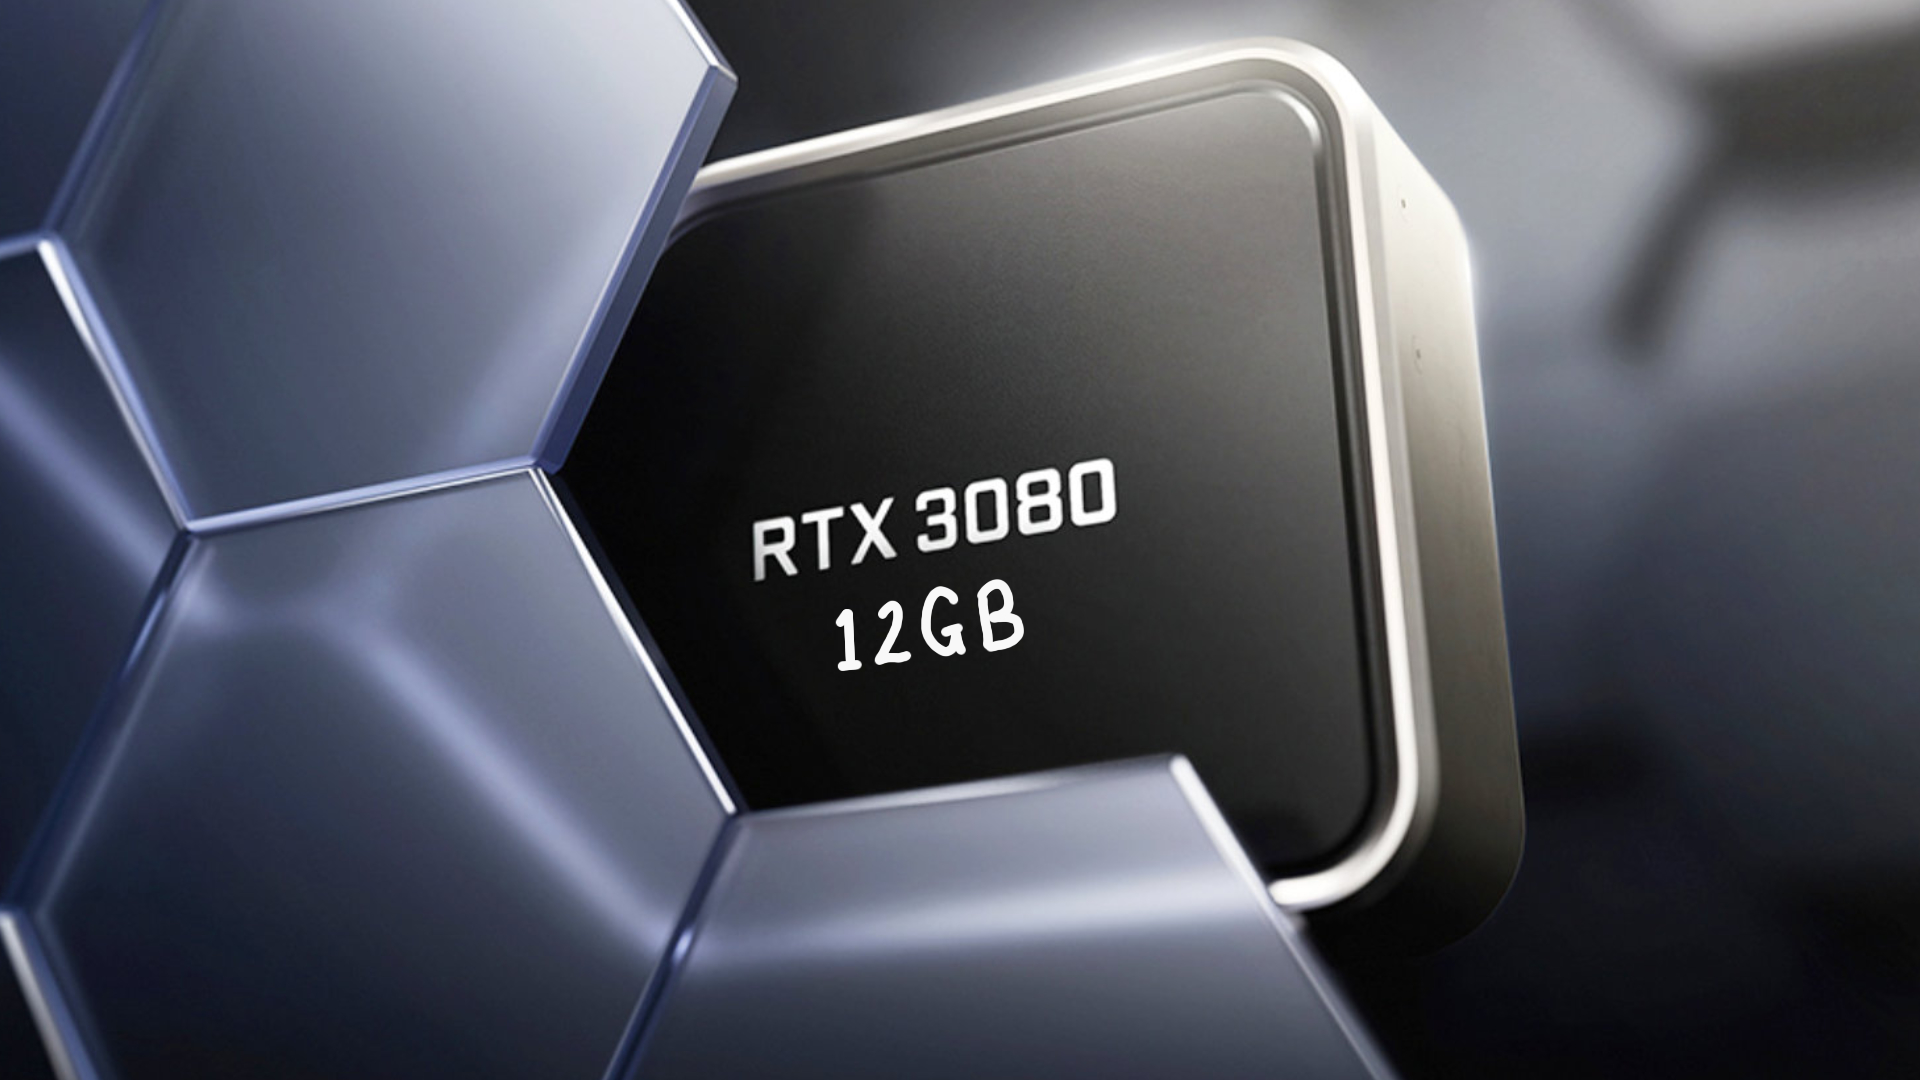 Nvidia GeForce RTX 3080 12GB reportedly returns to help RTX 4000 GPUs